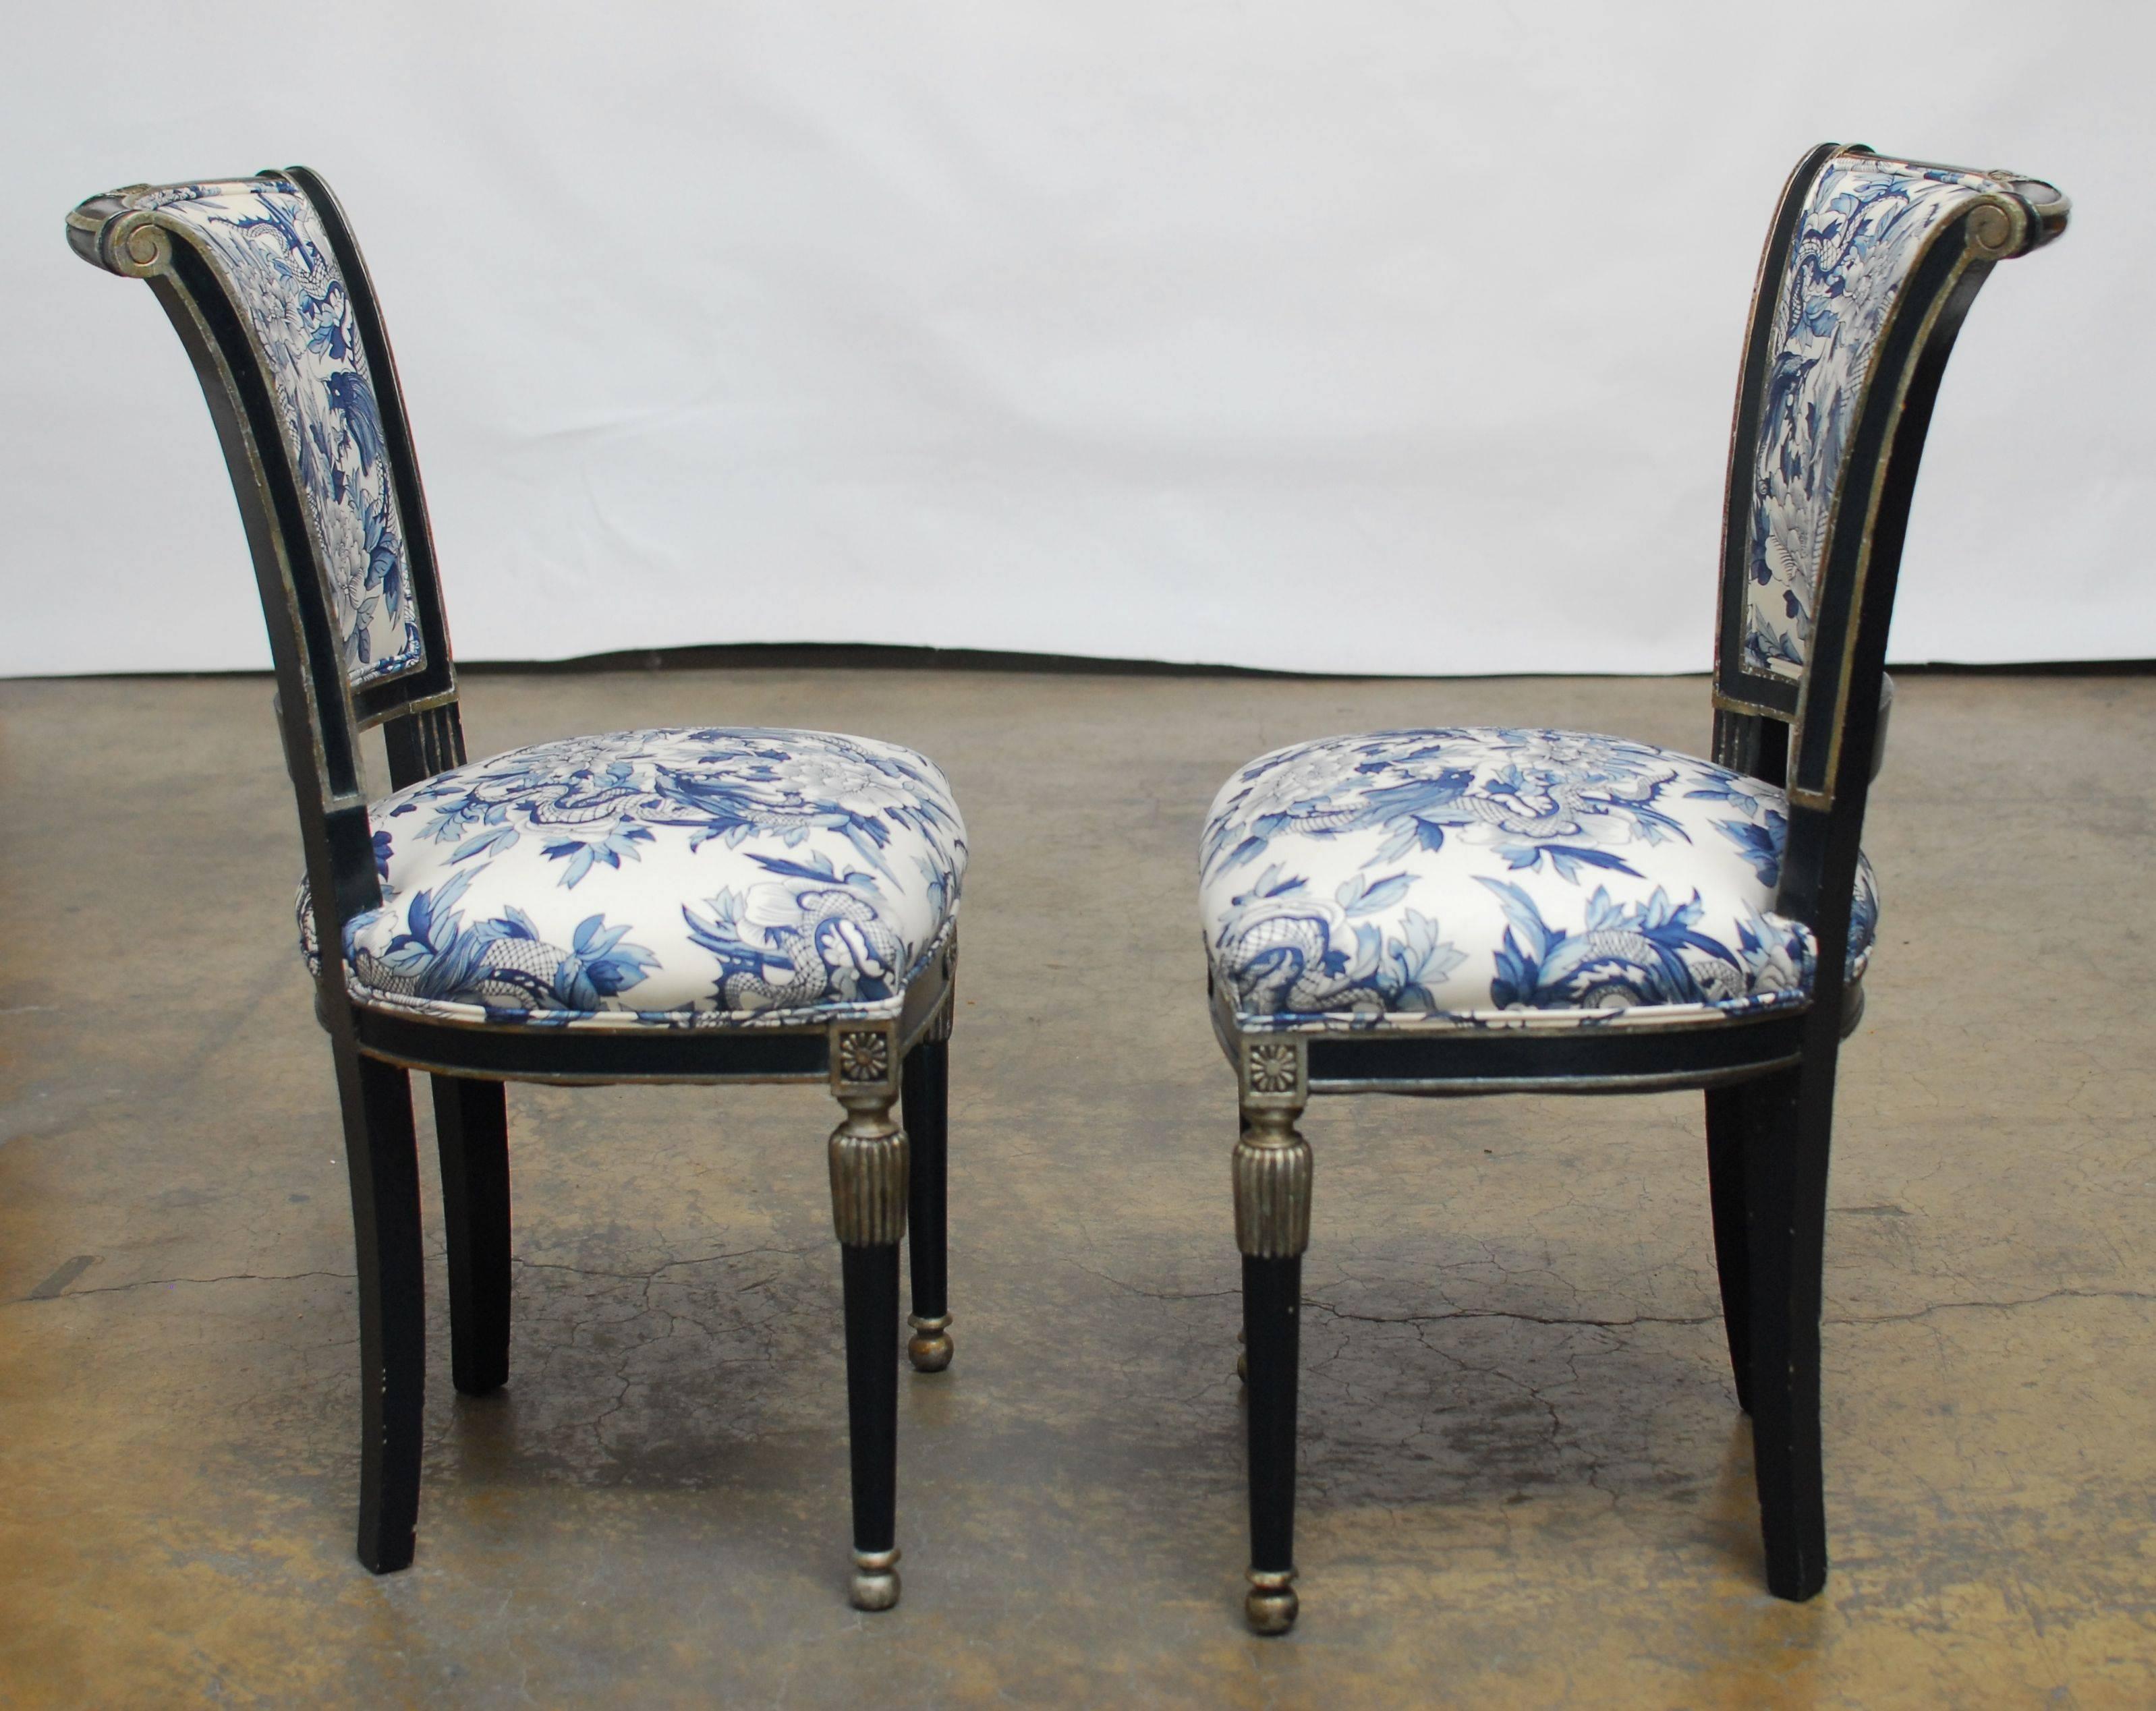 Striking French Directoire style side chairs with a dark royal blue frame and silver banding. Featuring a Ralph Lauren toile chinoiserie blue and white upholstery with dragon and foliate decorations and a double welt border. These beautiful carved